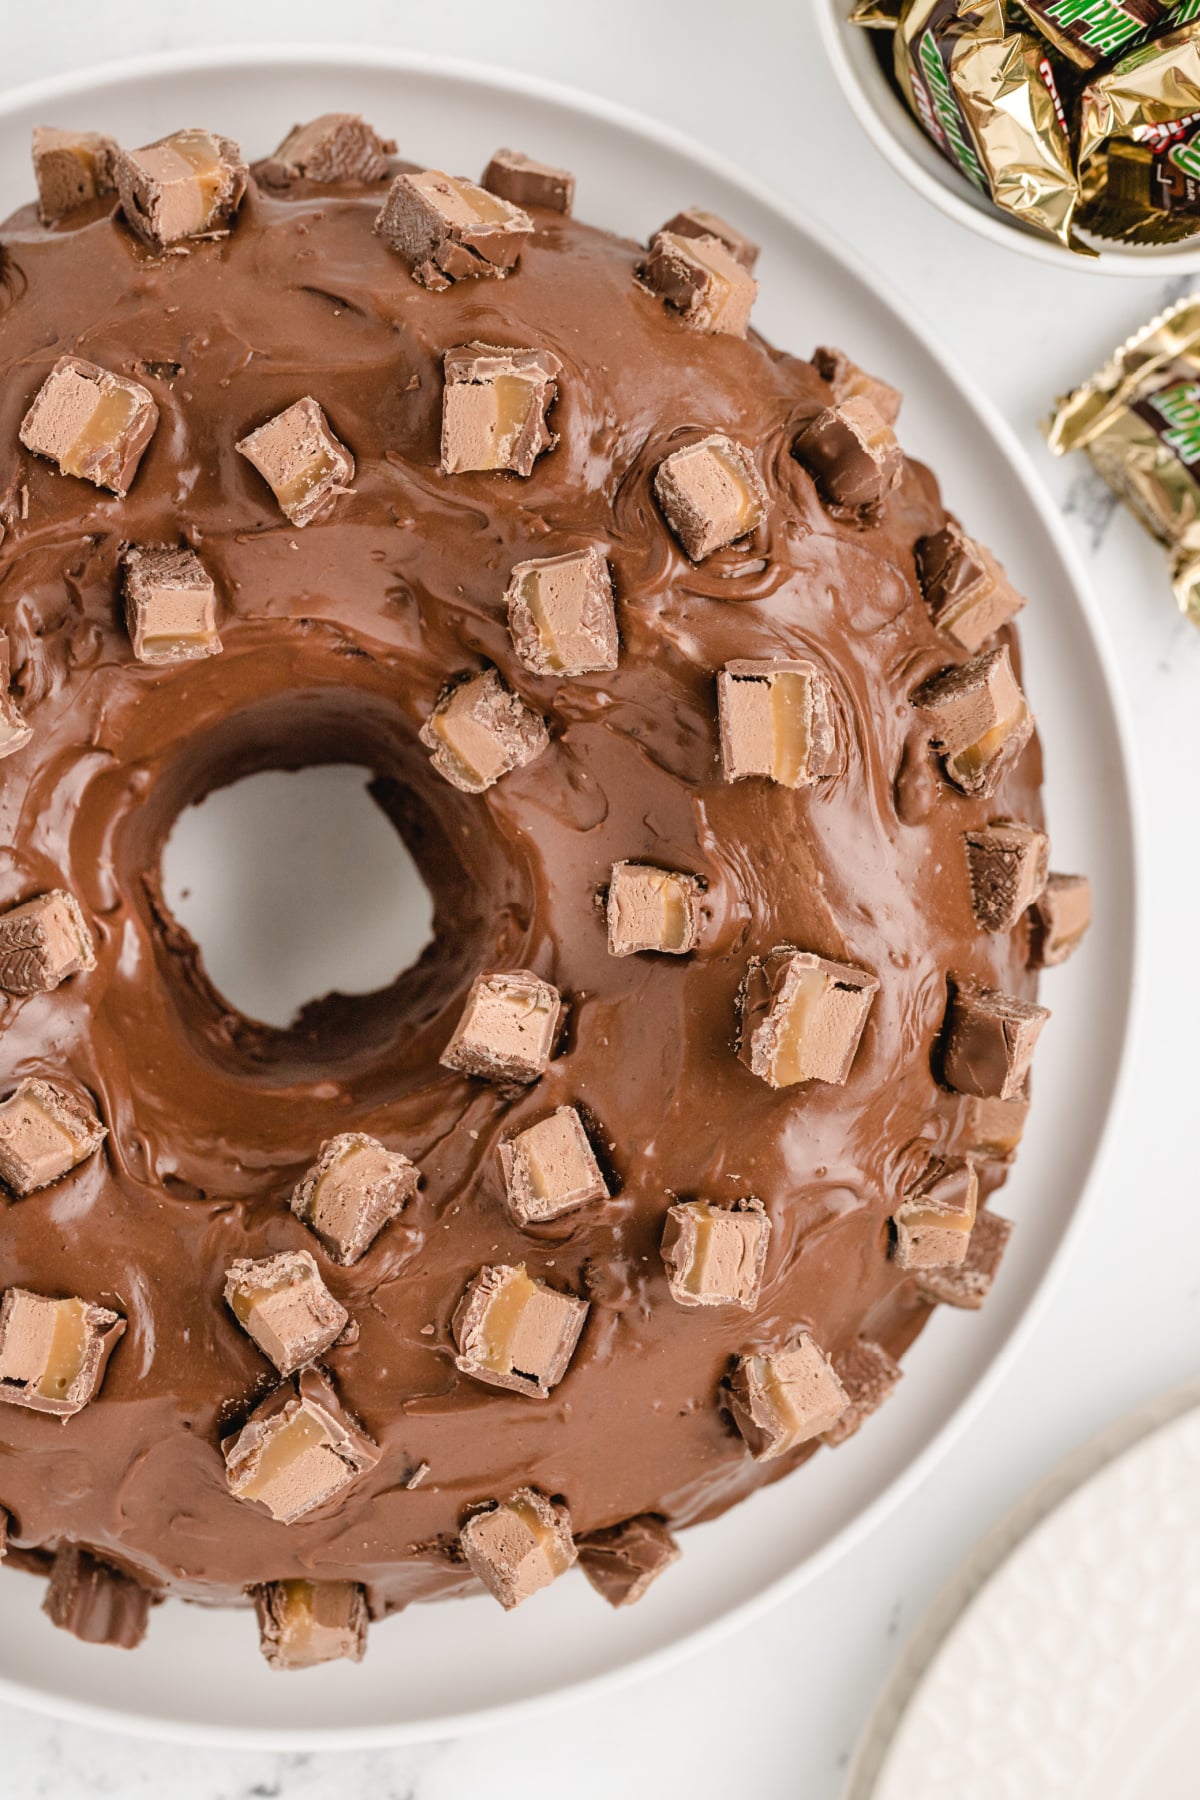 Milky Way Cake is made with melted Milky Way candy bars and topped with a chocolate marshmallow ganache! Perfect bundt cake recipe for leftover Halloween candy, holidays, or any time you need a delicious dessert recipe.